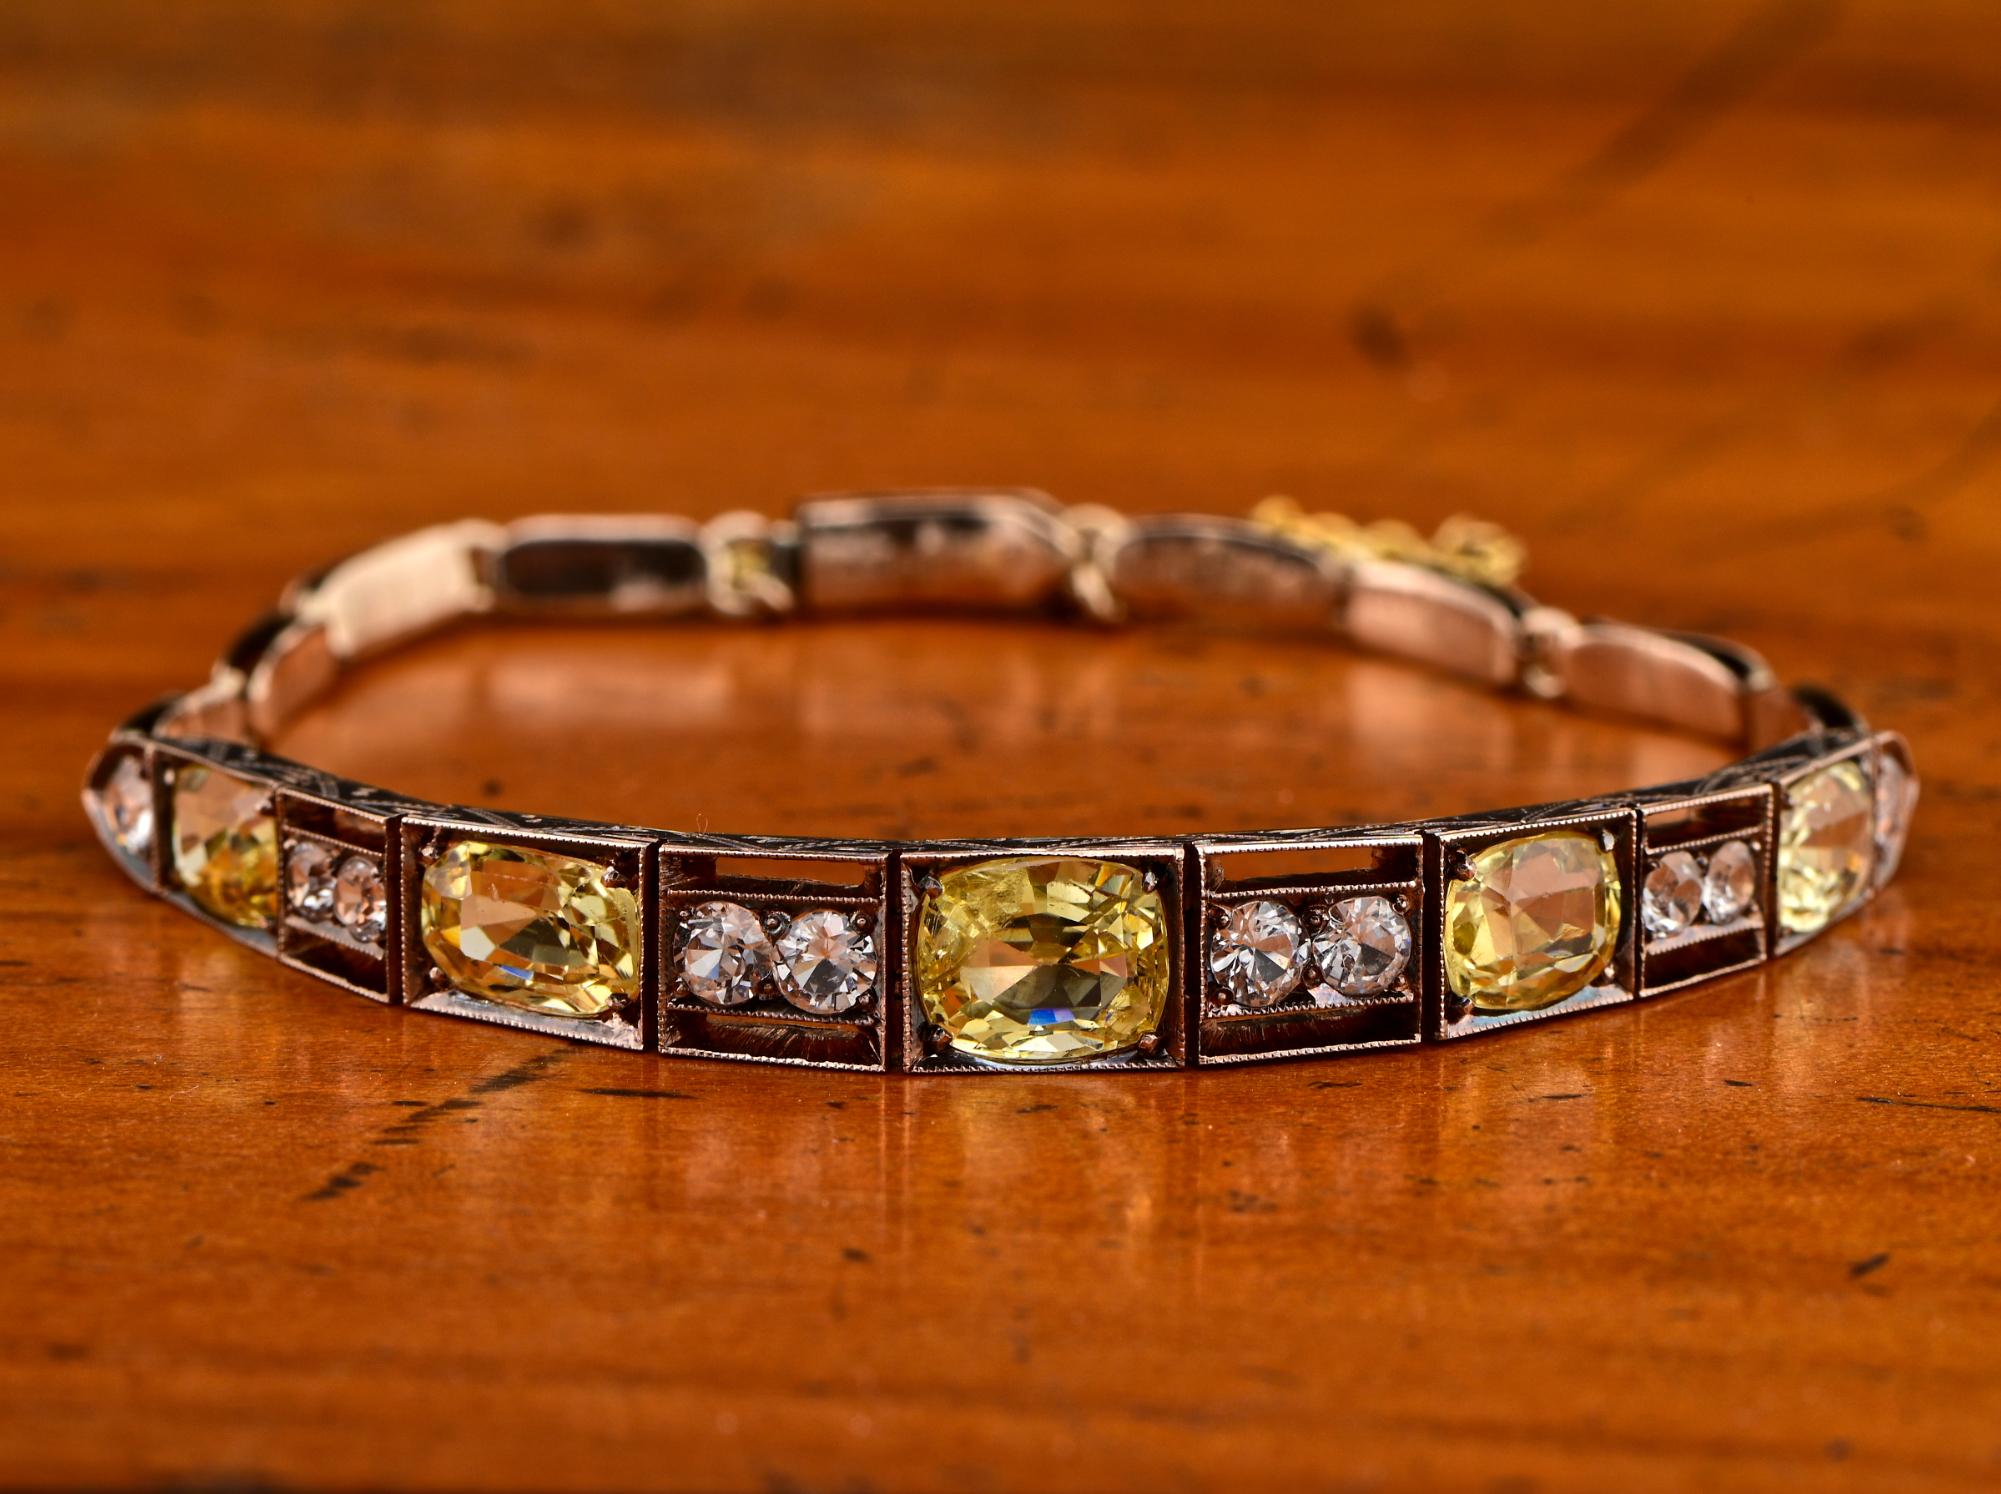 Rare Find
This gorgeous and unique antique bracelet is in transition between Victorian and Edwardian era, 1900 ca
Exquisite in workmanship all hand executed 18 KT gold tested, detailed by engravings and fine open work on the frontal side, hosting a